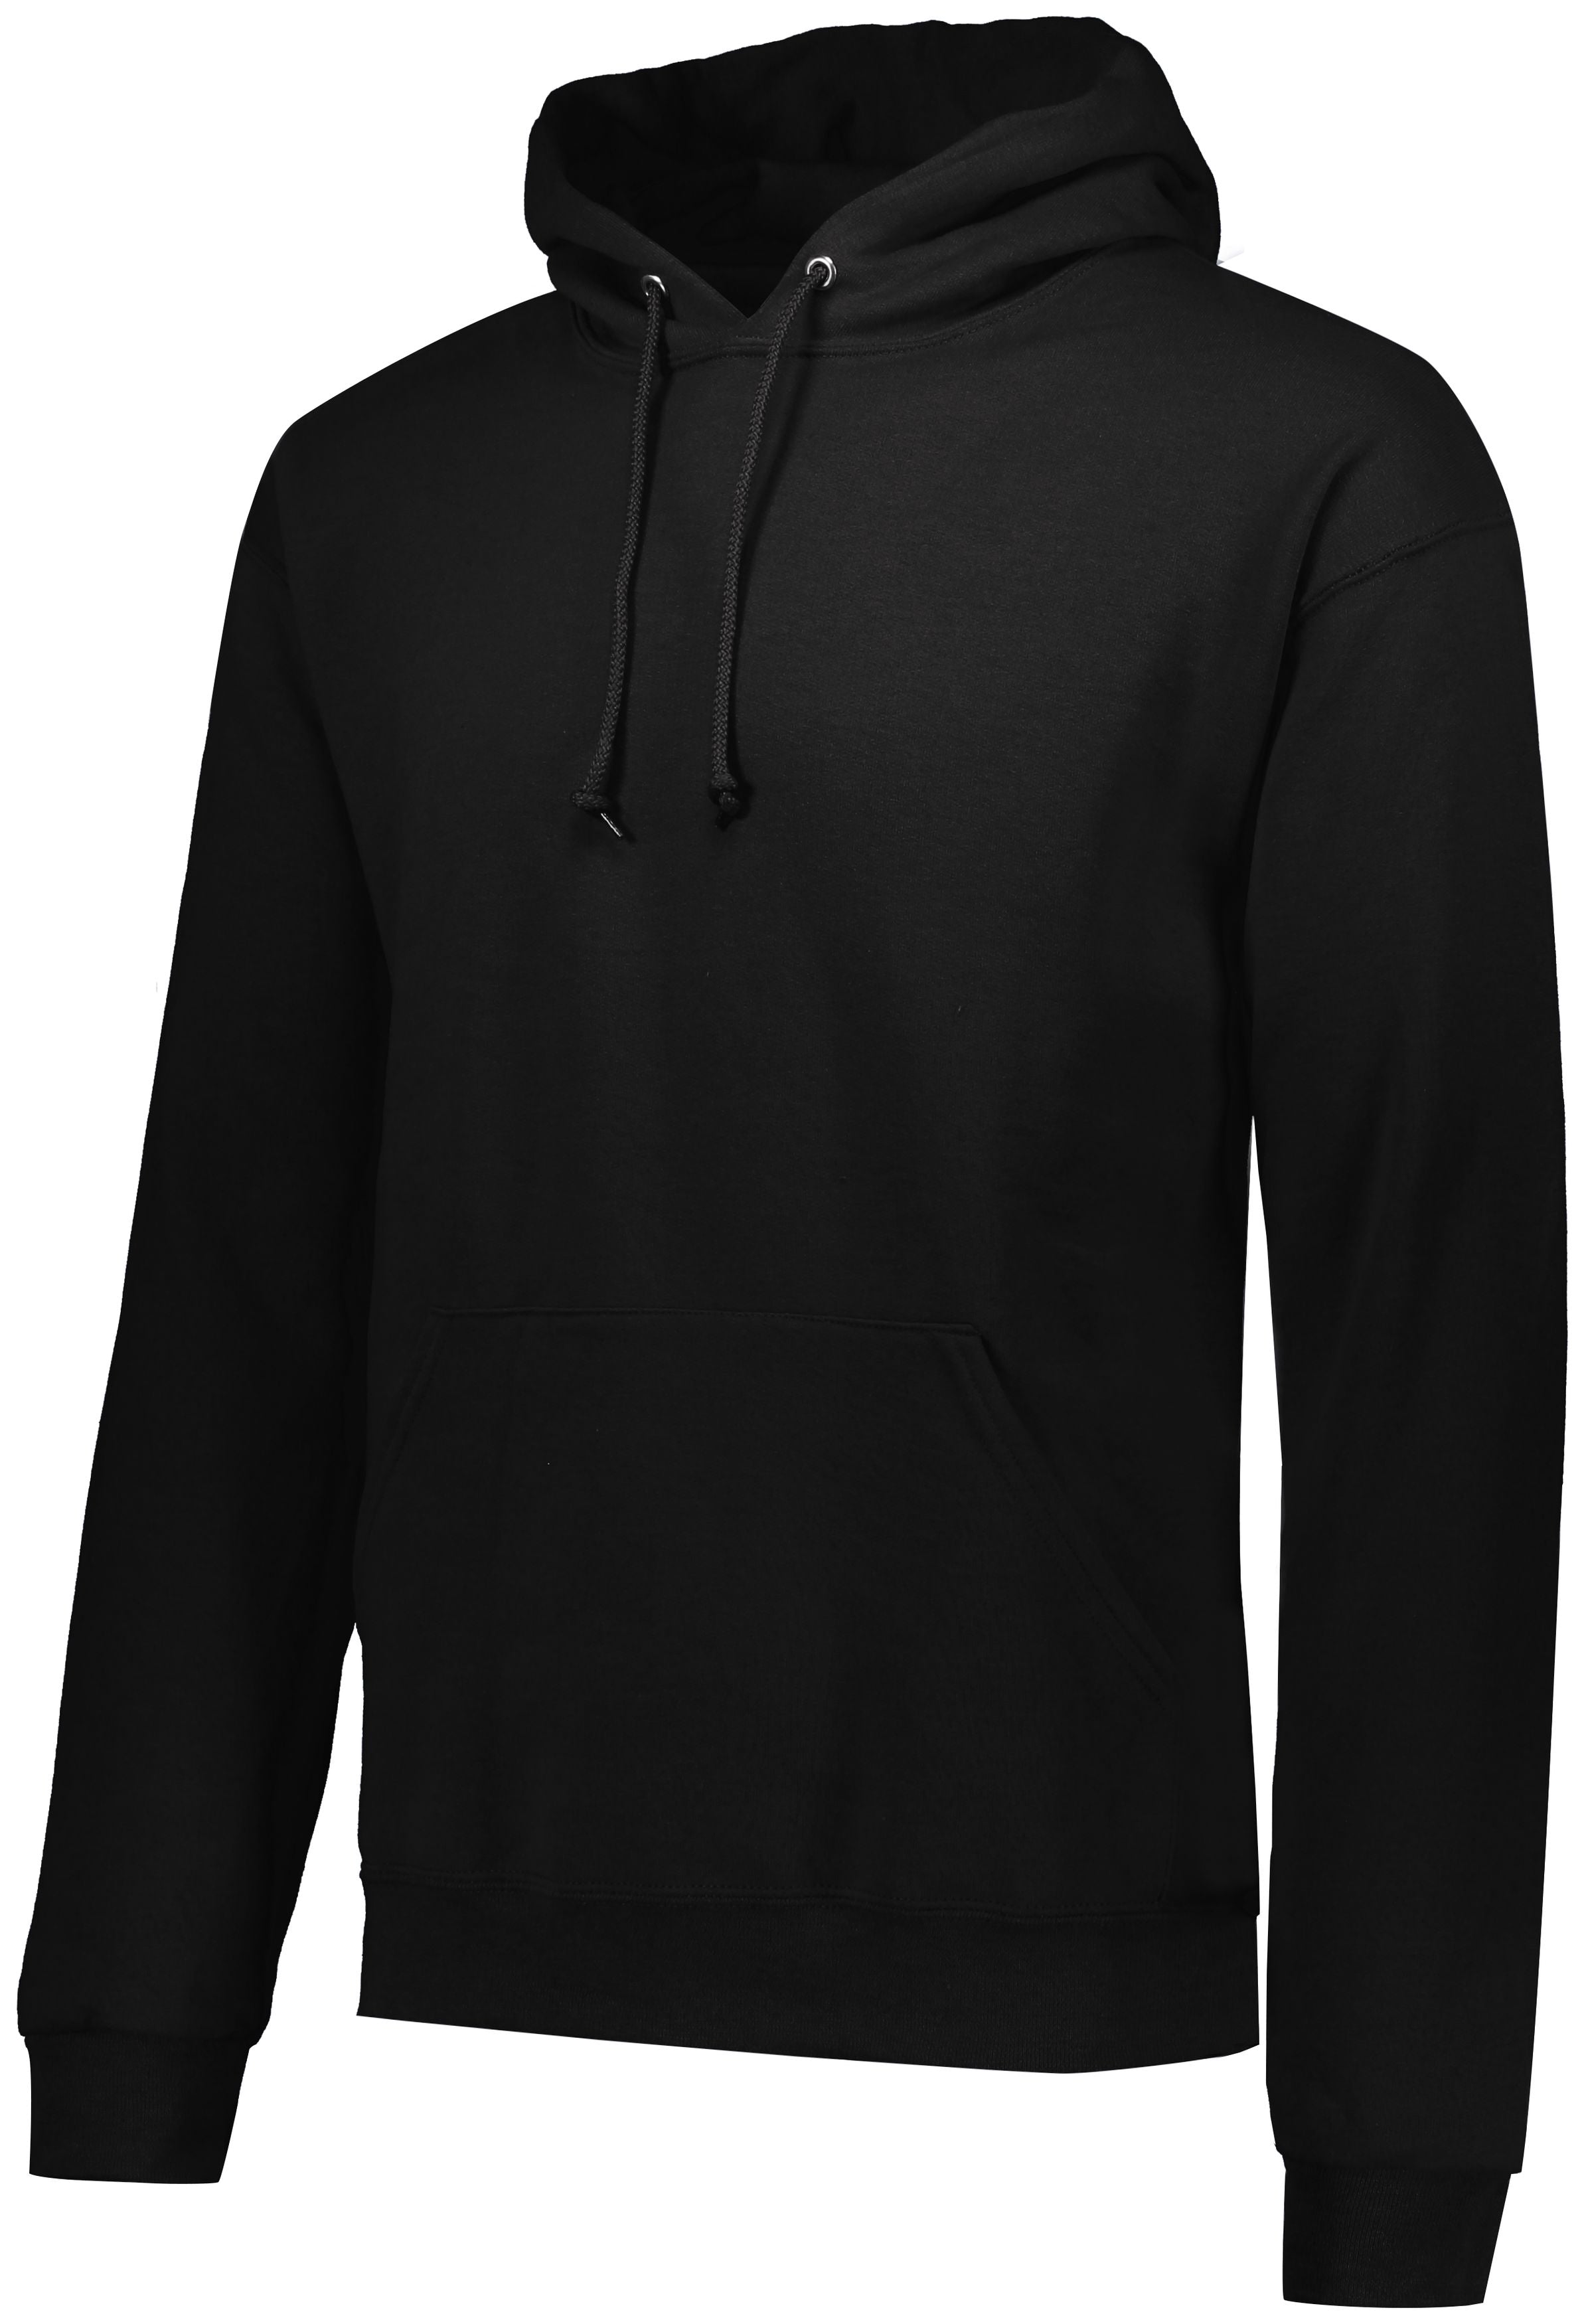 Russell Athletic Jerzees 50/50 Hoodie in Black  -Part of the Adult, Russell-Athletic-Products, Shirts product lines at KanaleyCreations.com